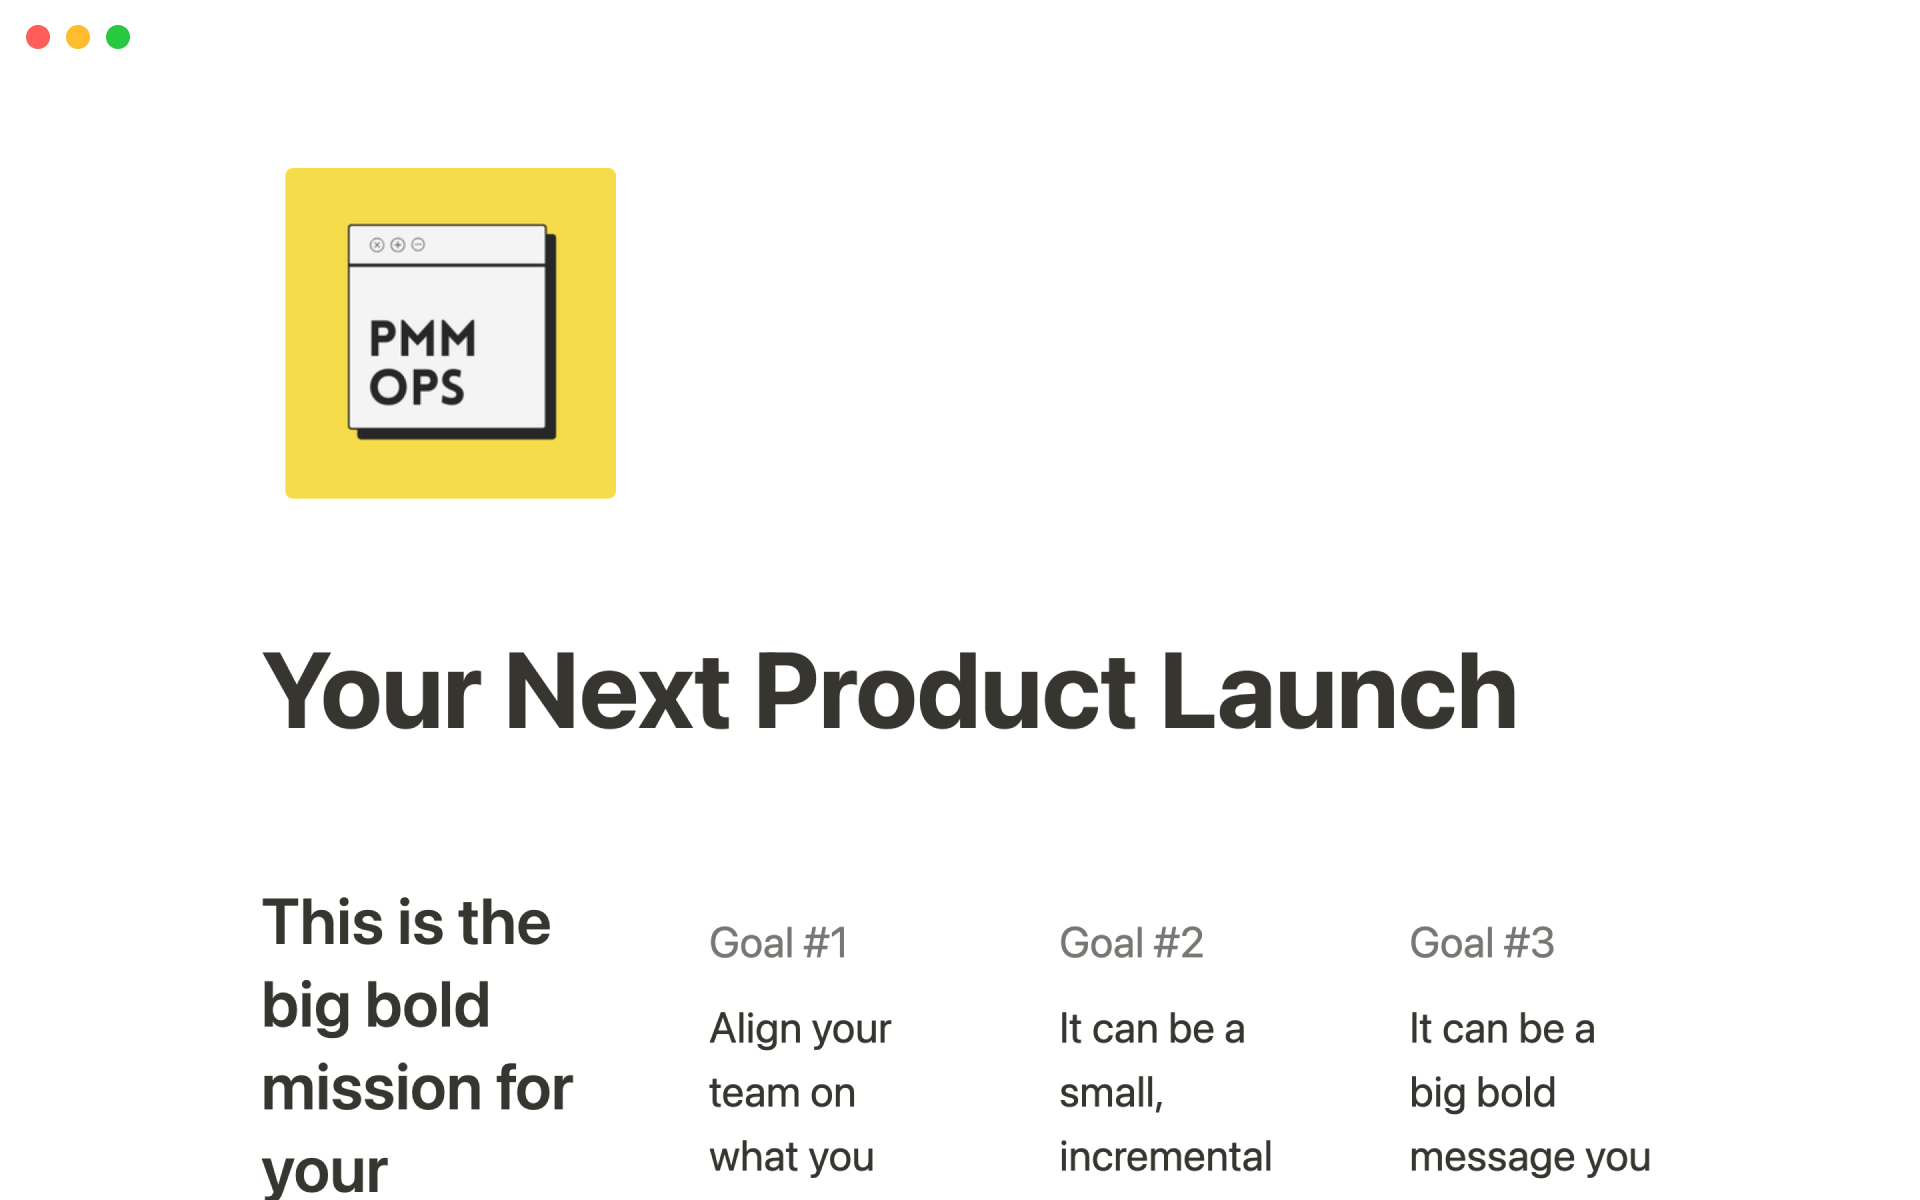 An instructional framework for product launches.